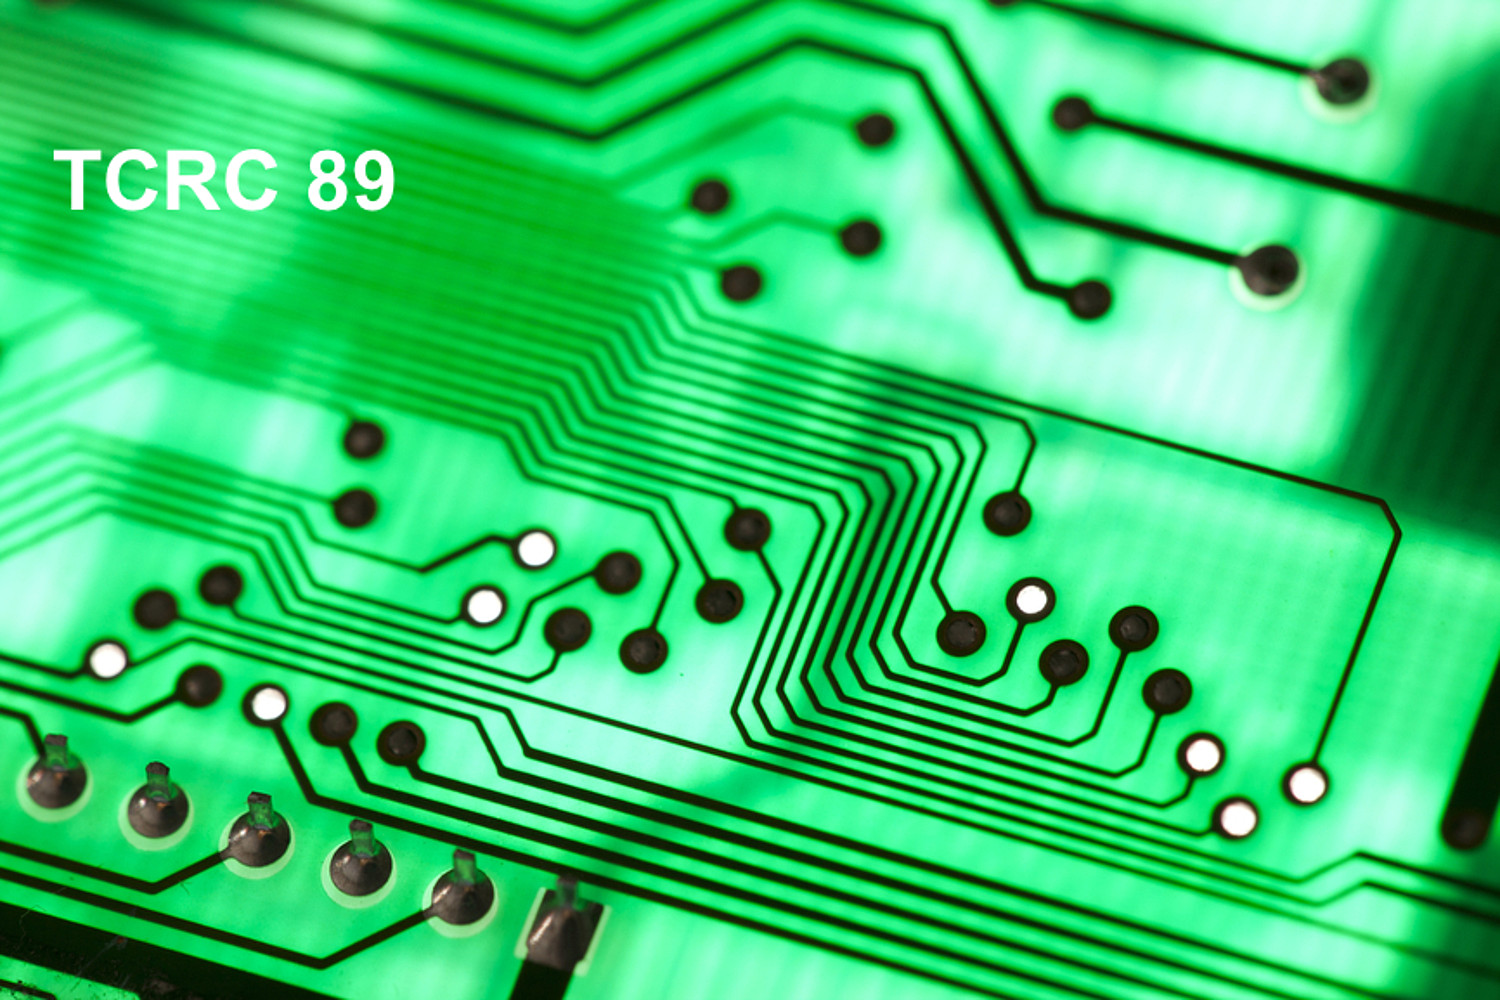 Printed Circuit Board with Text "TCRC 89"